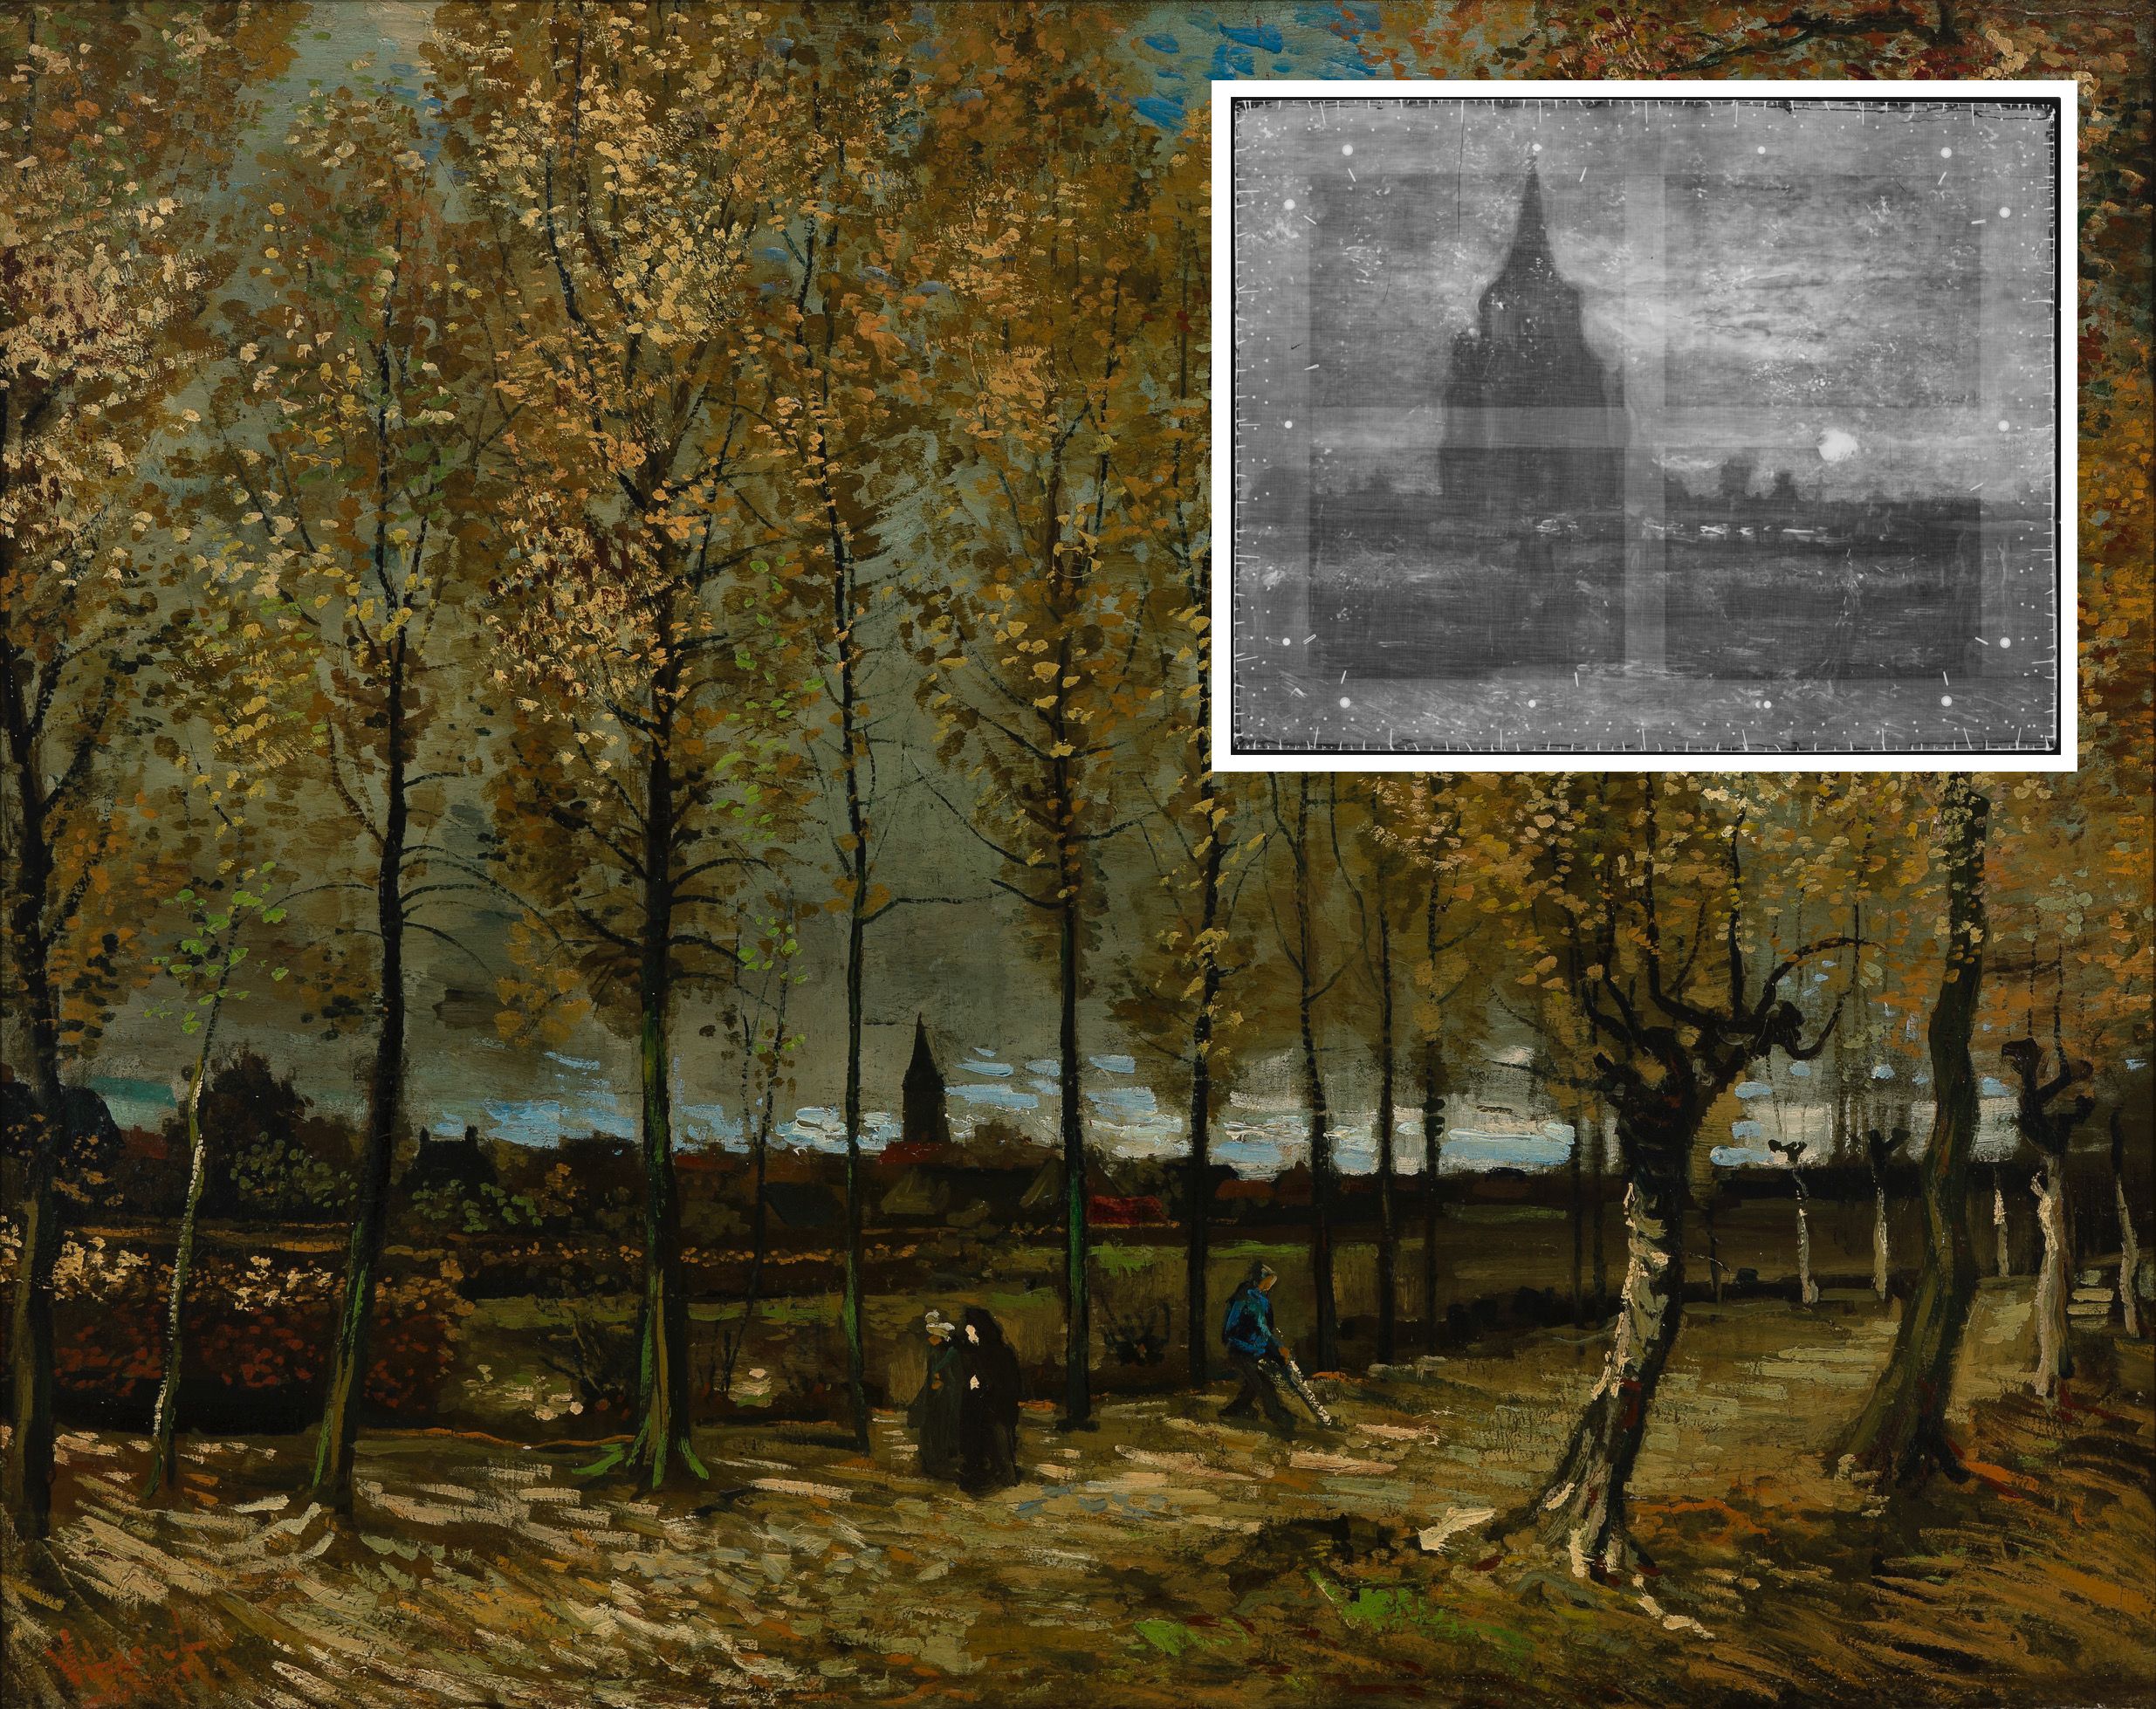 Becoming Vincent Van Gogh: The Paris Years - The New York Times